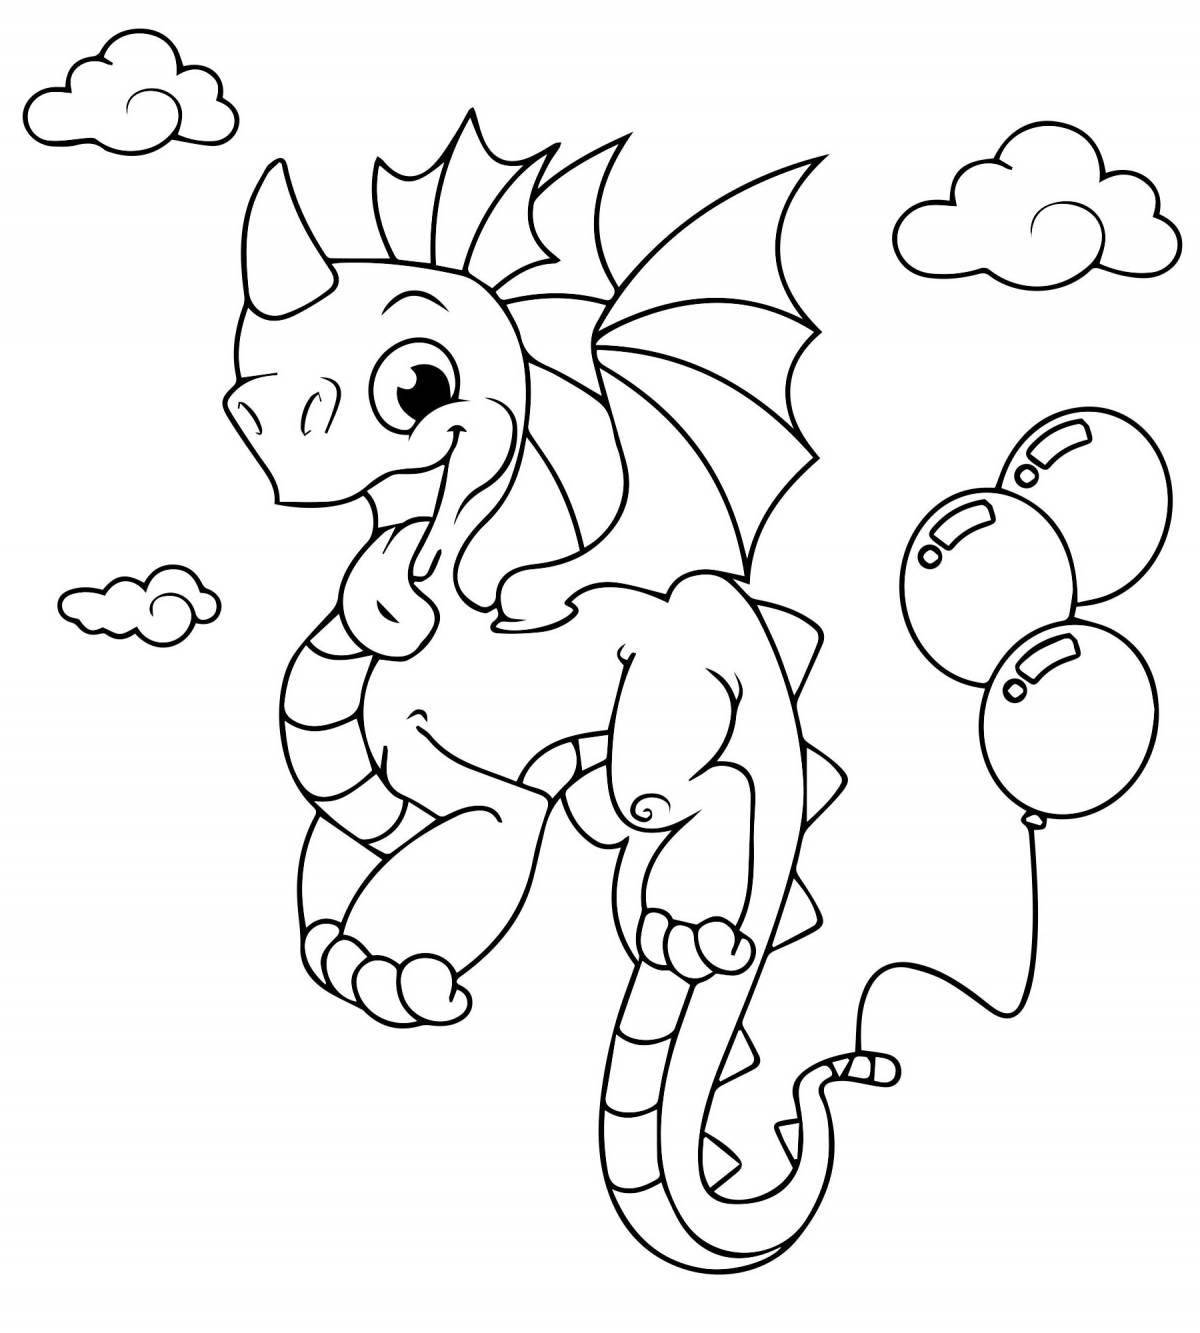 Intriguing coloring dragons for kids